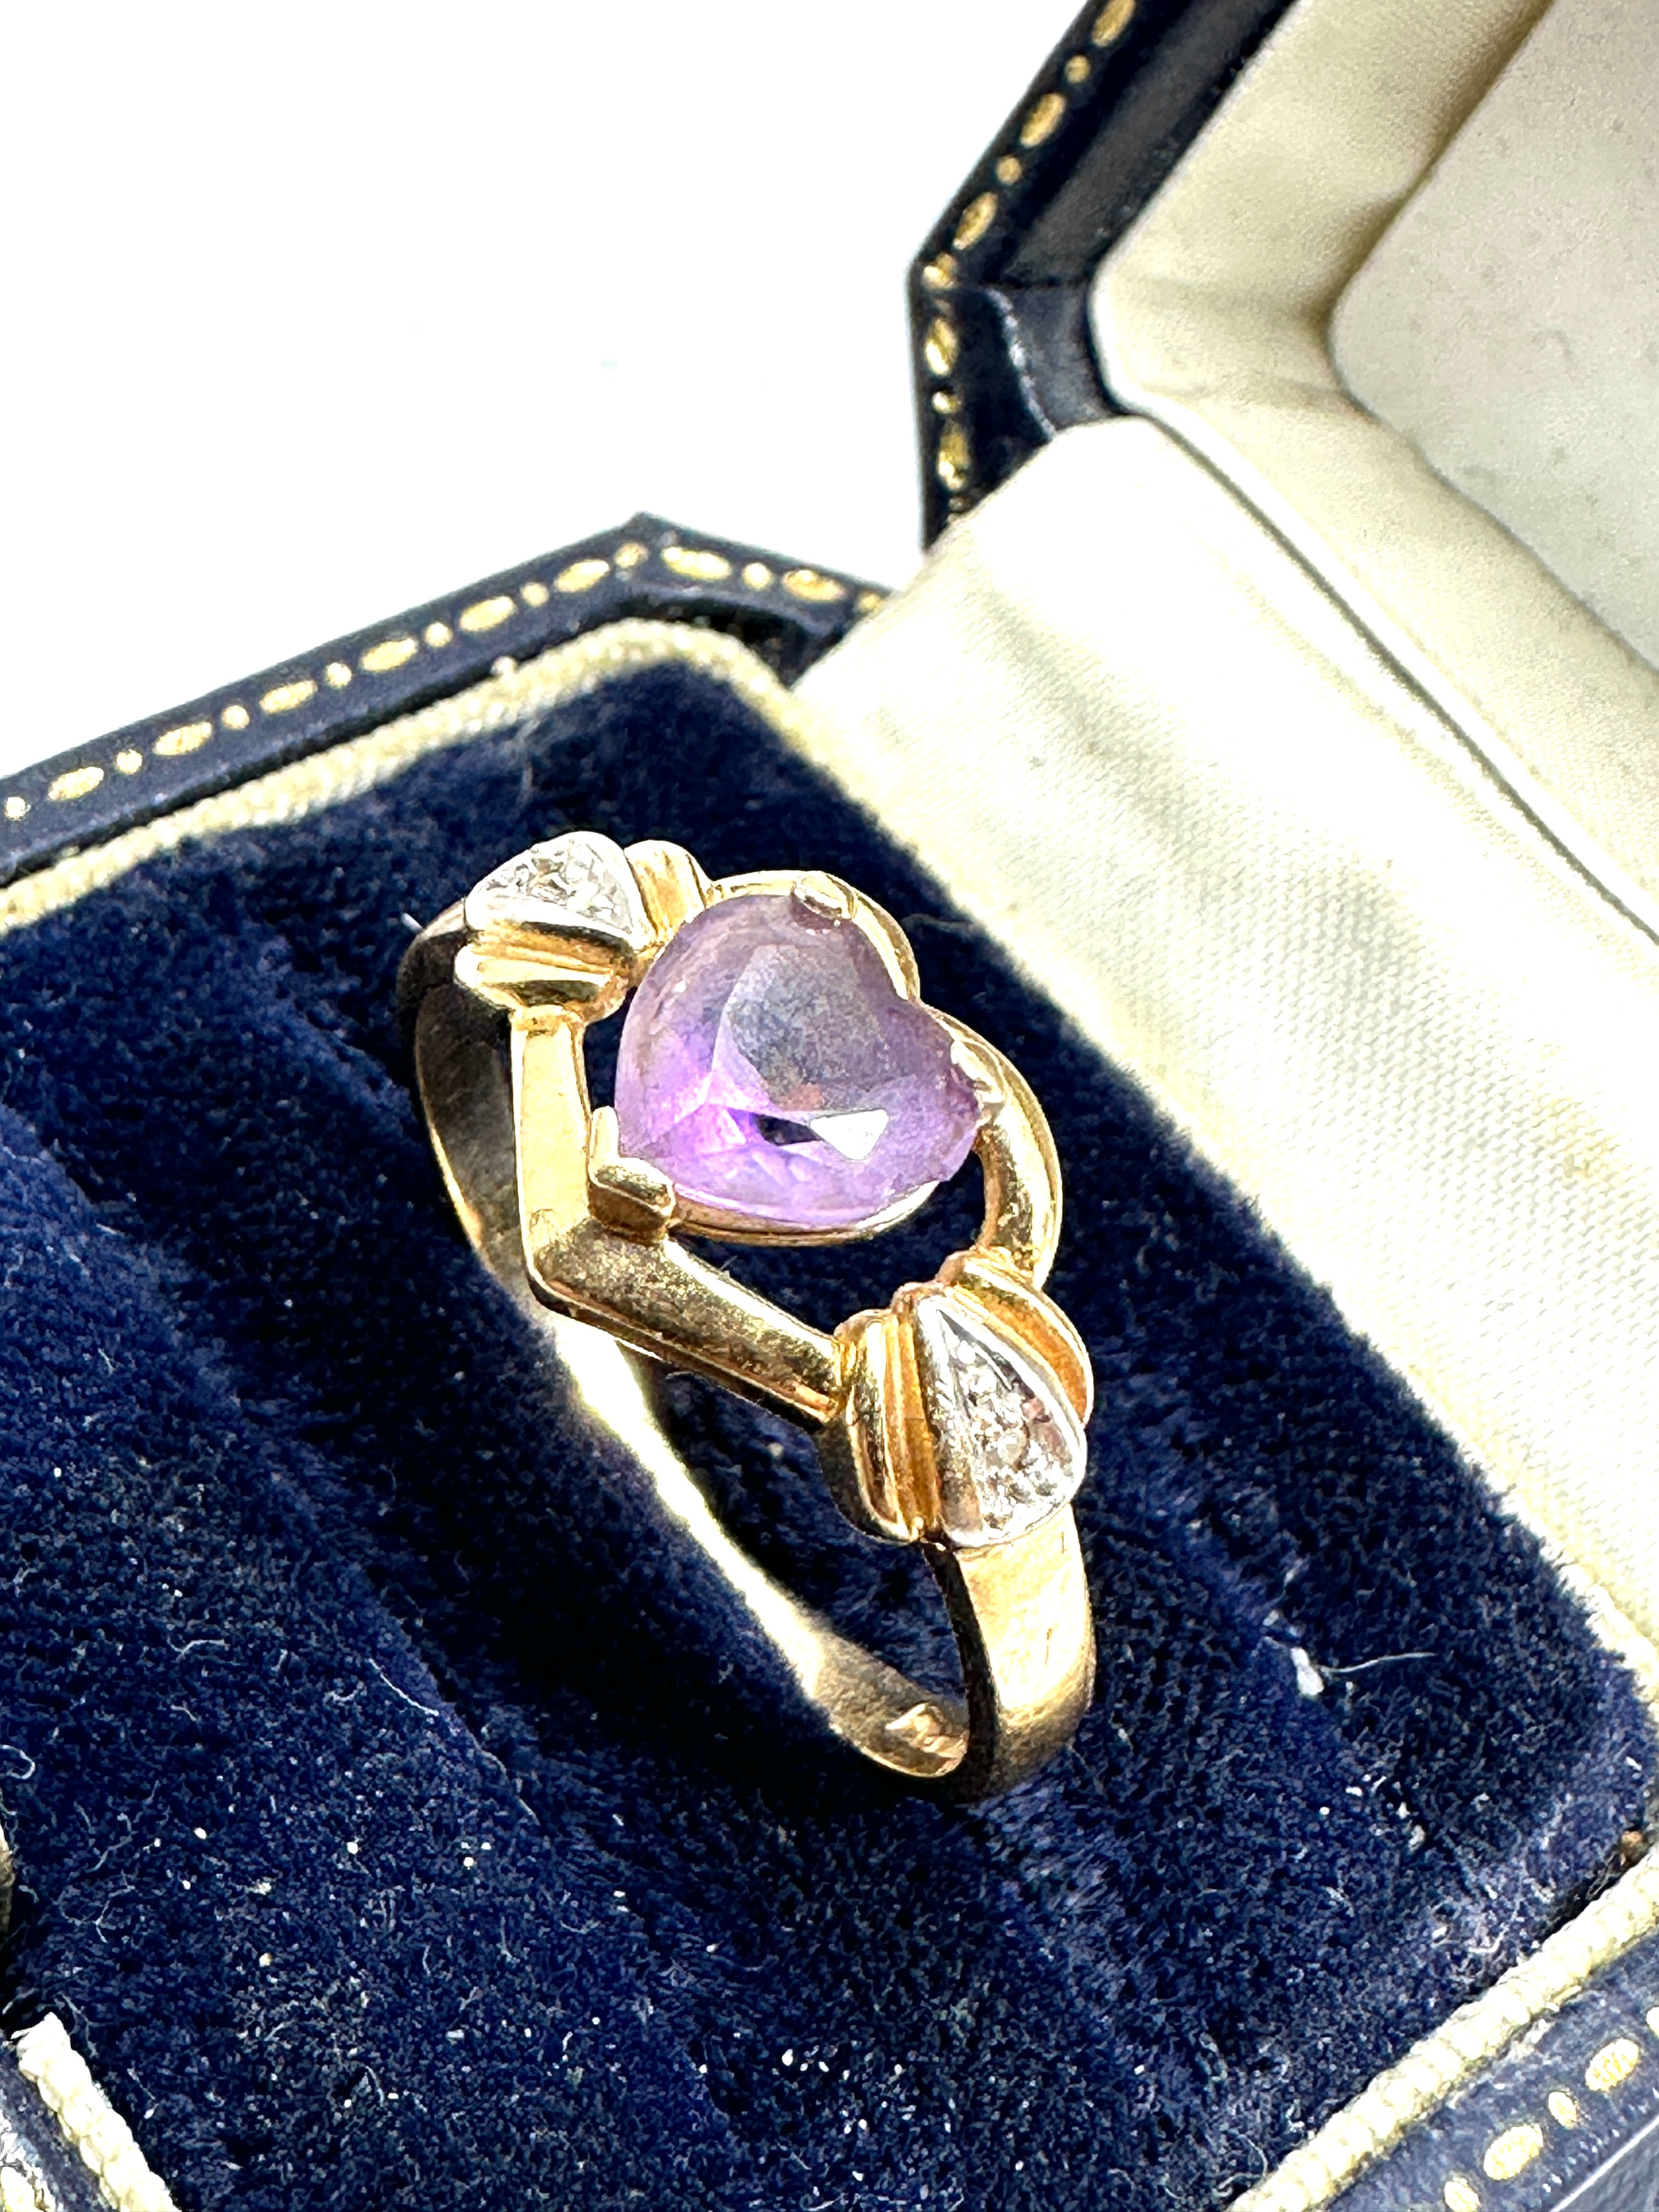 14ct gold diamond & amethyst heart ring weight 3.3g - Image 2 of 4